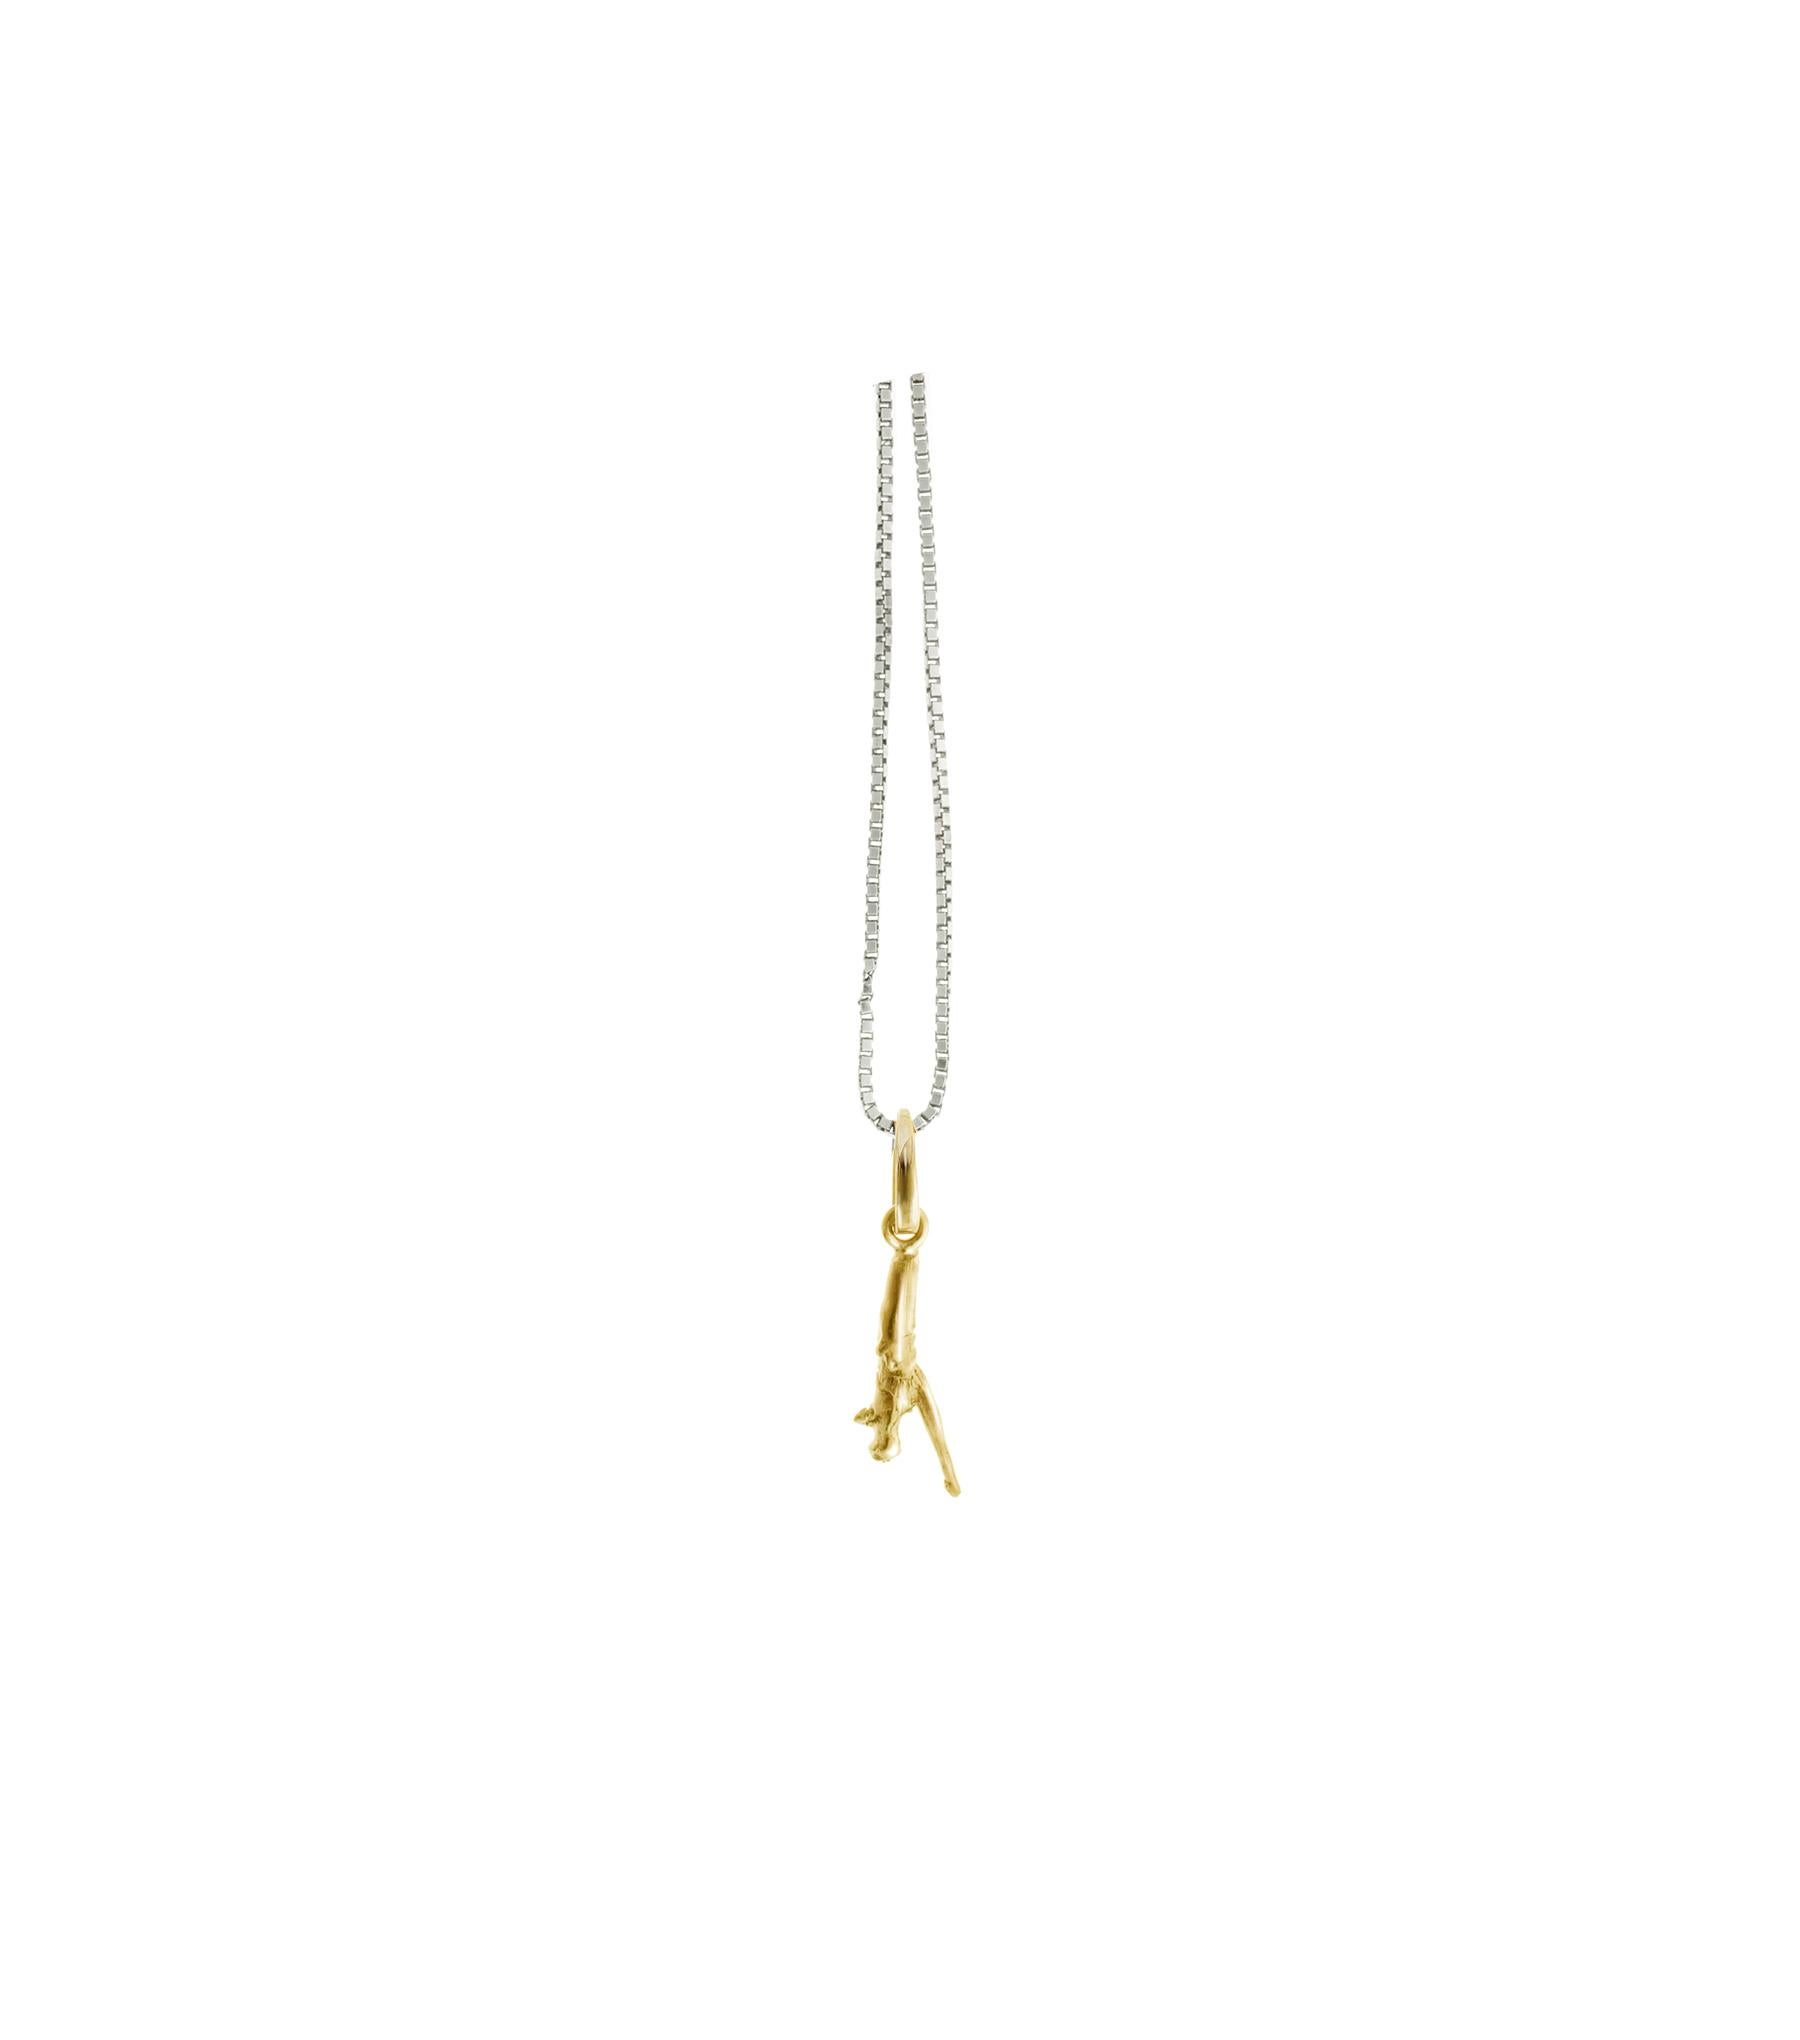 This 18 karat yellow gold Tea Twig Chainka pendant charm is a jewelry piece created by the artist, which opens the collection of 